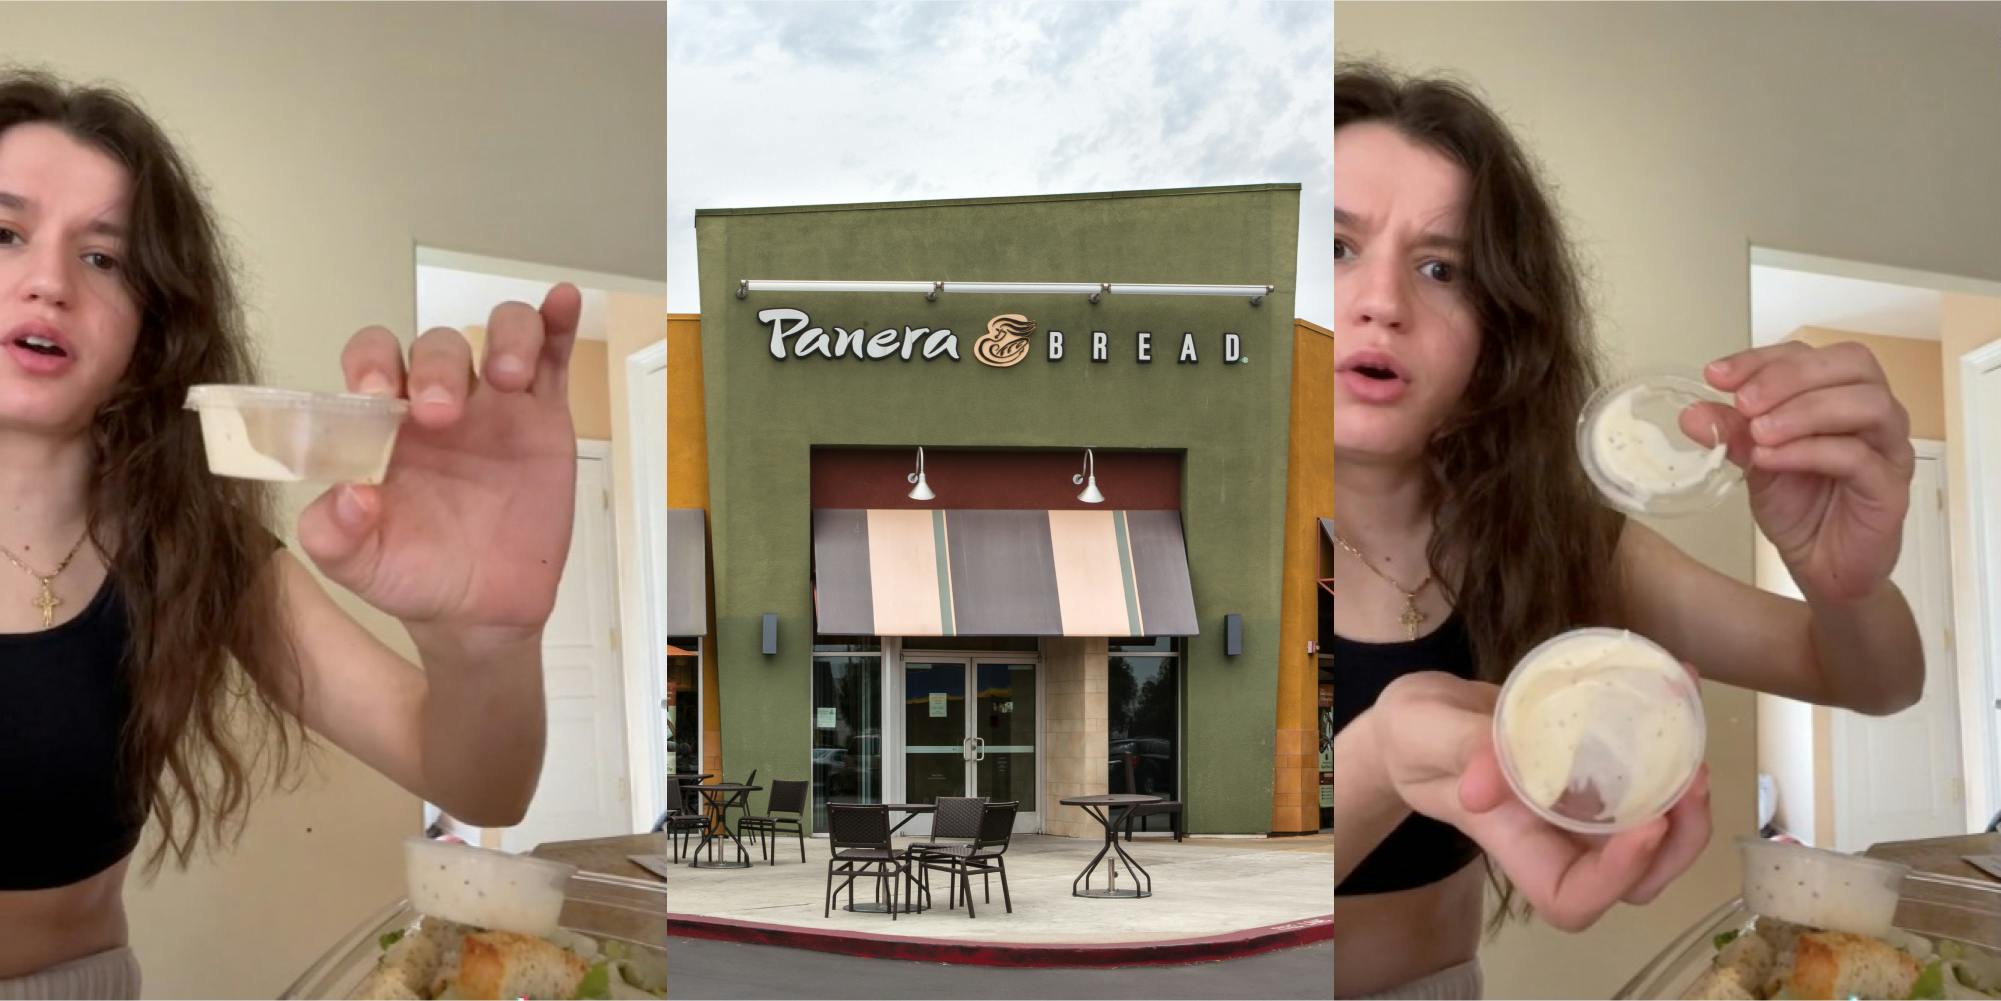 Customer Calls Out Panera for Nearly $10 Half Sandwich